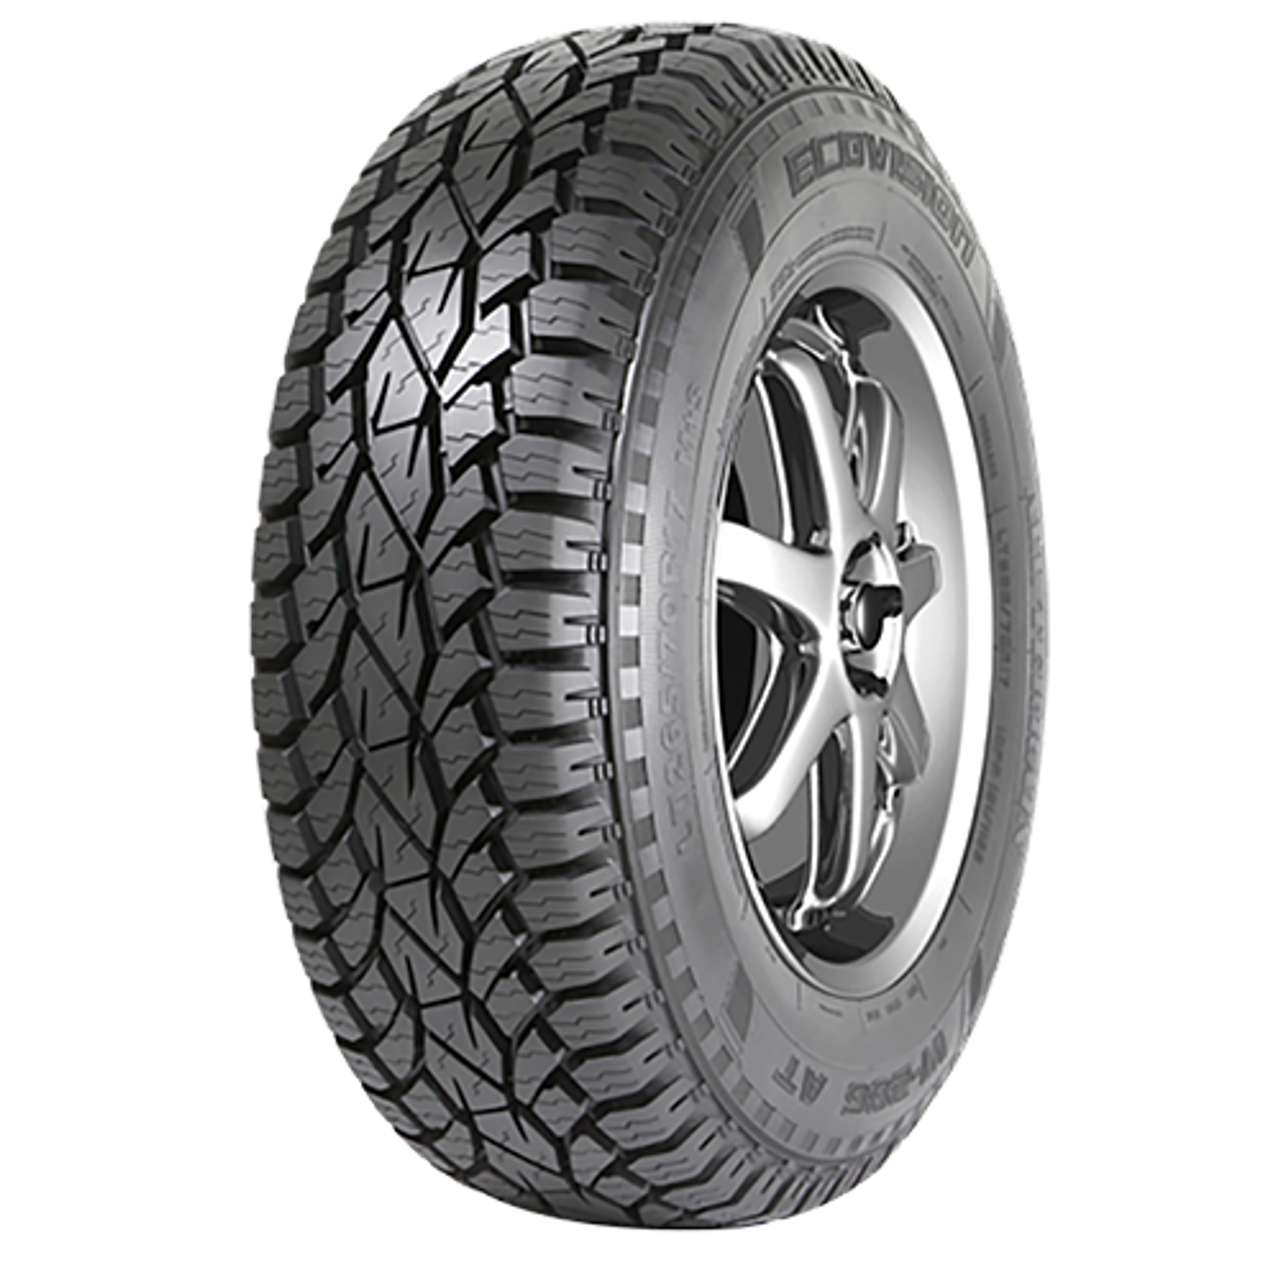 ECOVISION ECOVISION VI-286 AT 235/75R15 109S BSW XL